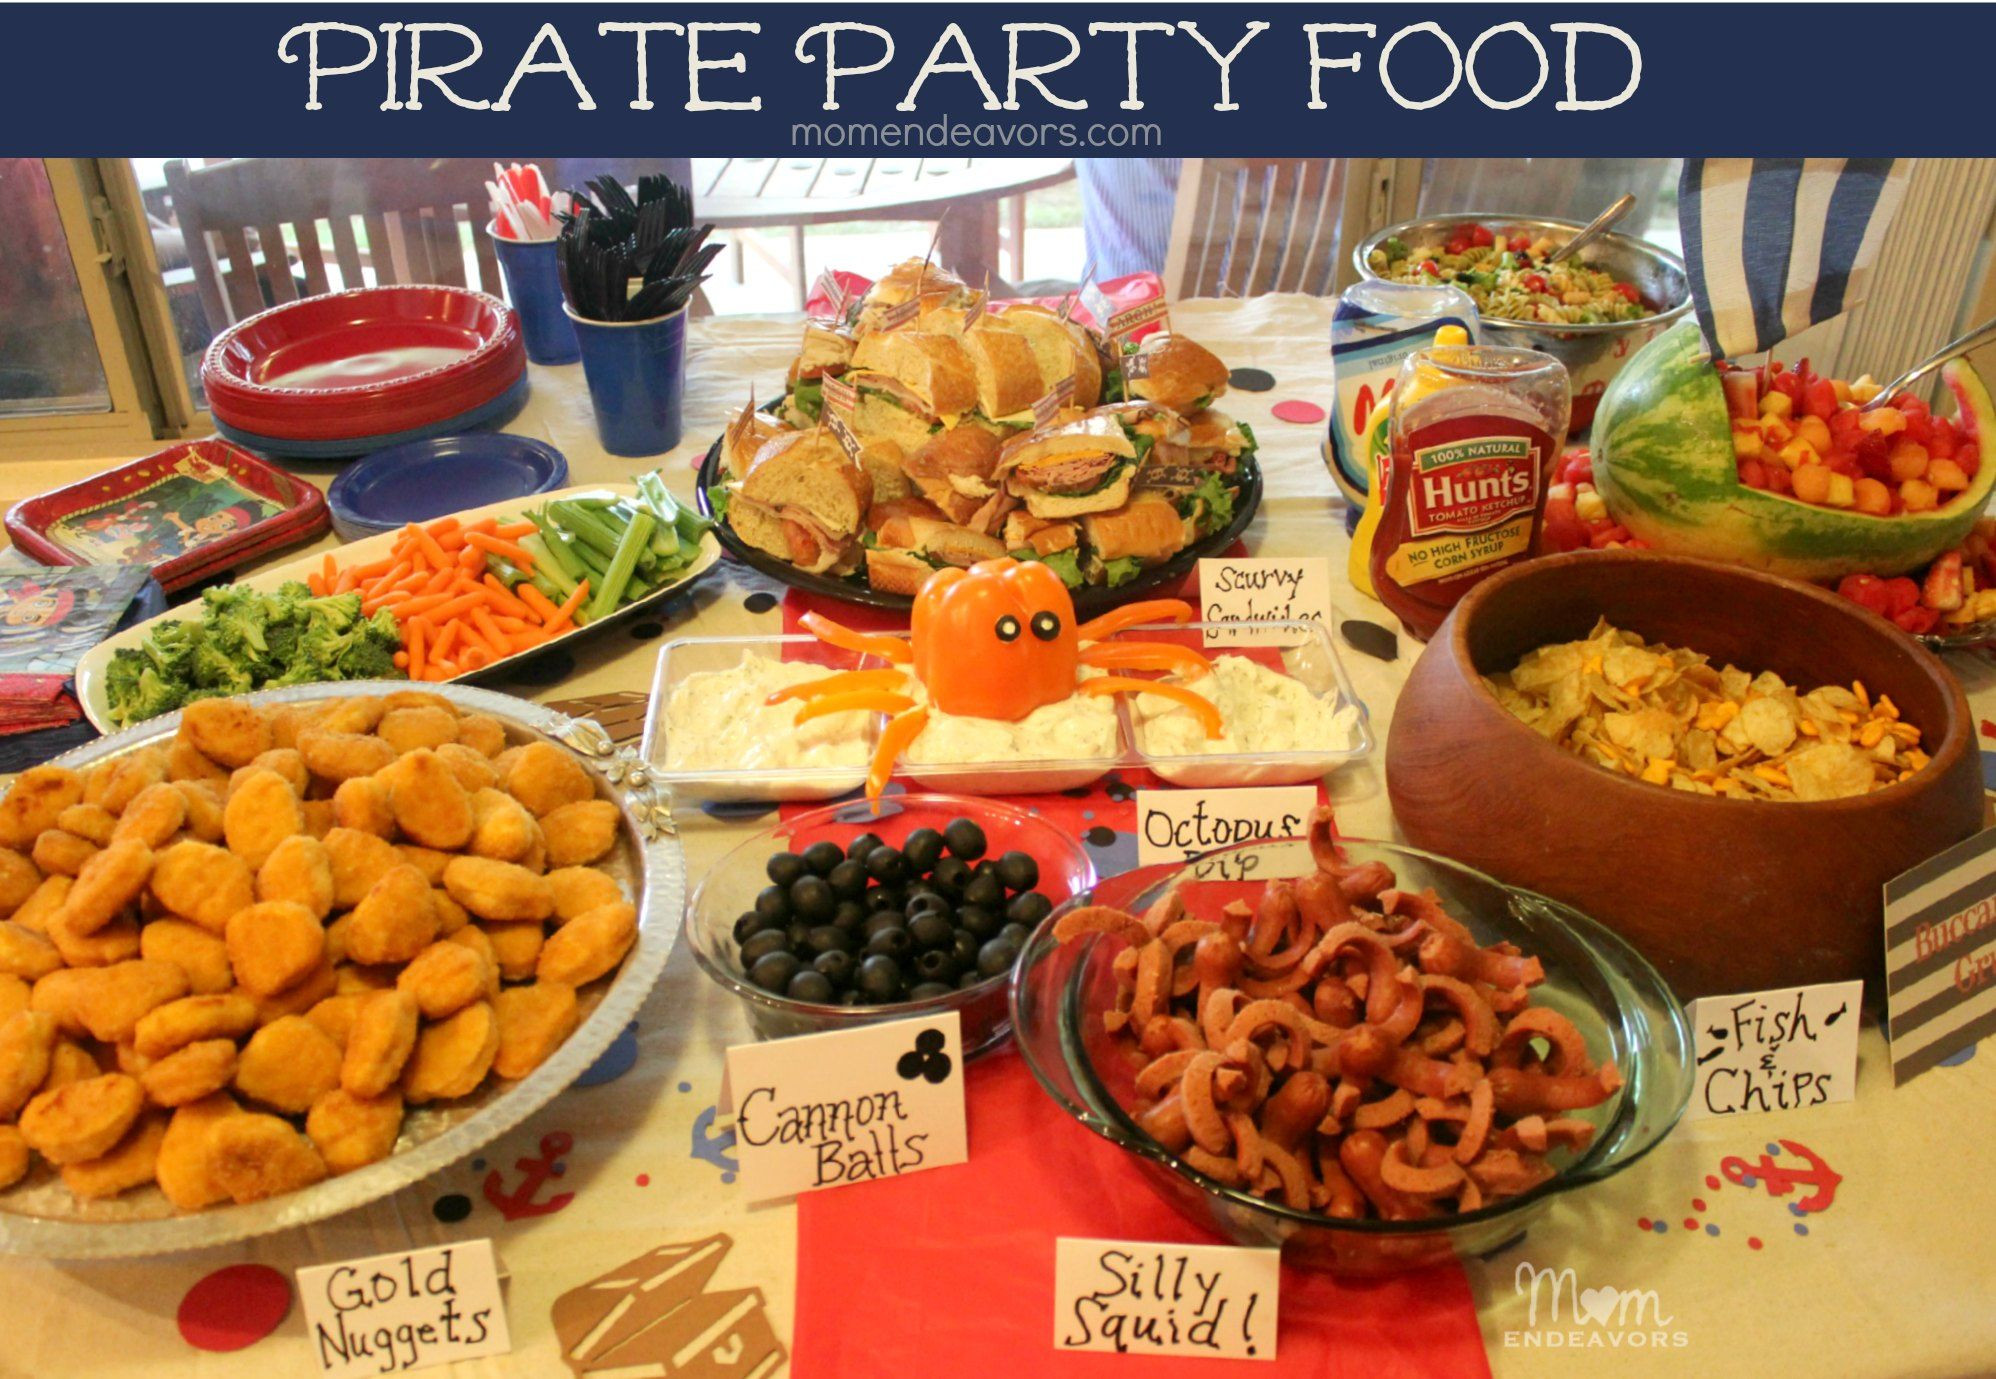 Jake And The Neverland Pirates Birthday Party Food Ideas
 Jake and the Never Land Pirates Birthday Party Food Ideas